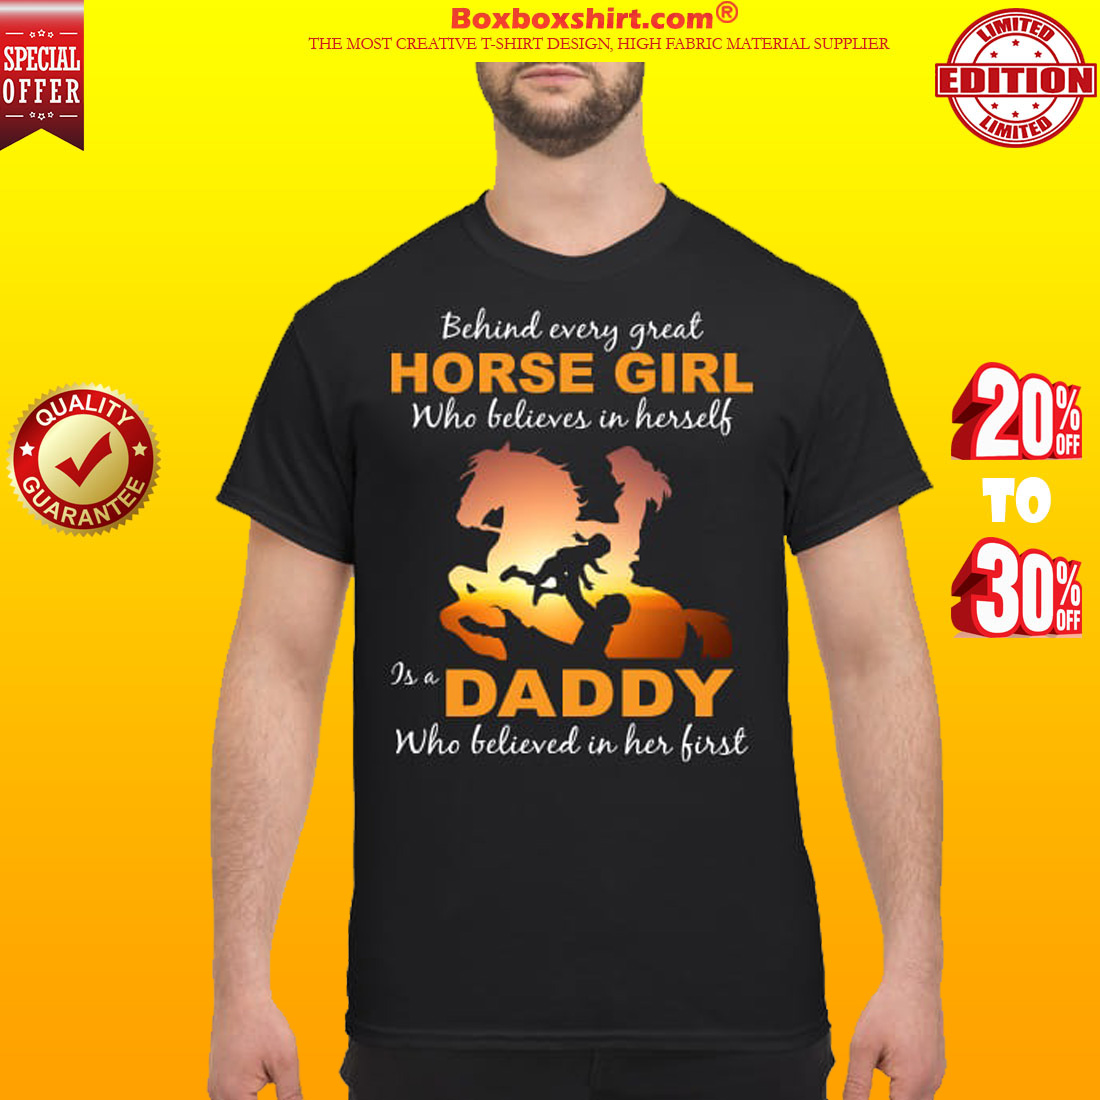 Behind every great horse girl who believe in herself is a daddy who believed in her first classic shirt